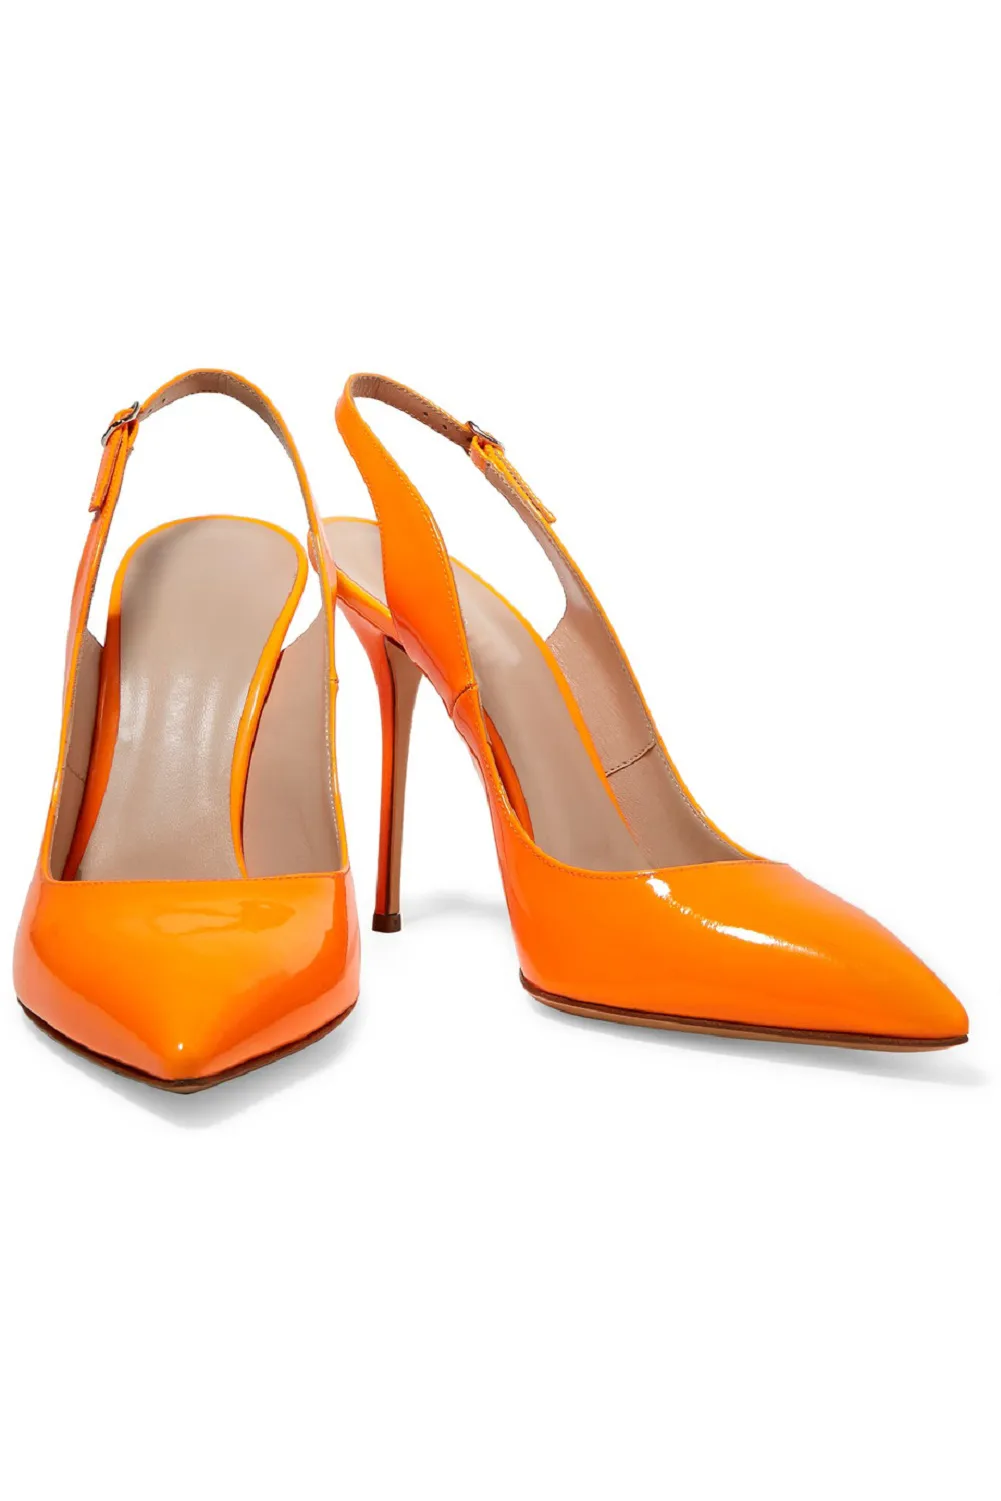 Zandina New Arrival Womens Handmade Patent Leather Shoes Slingback Pointy High Heel Fashion Party Prom Pumps Orange